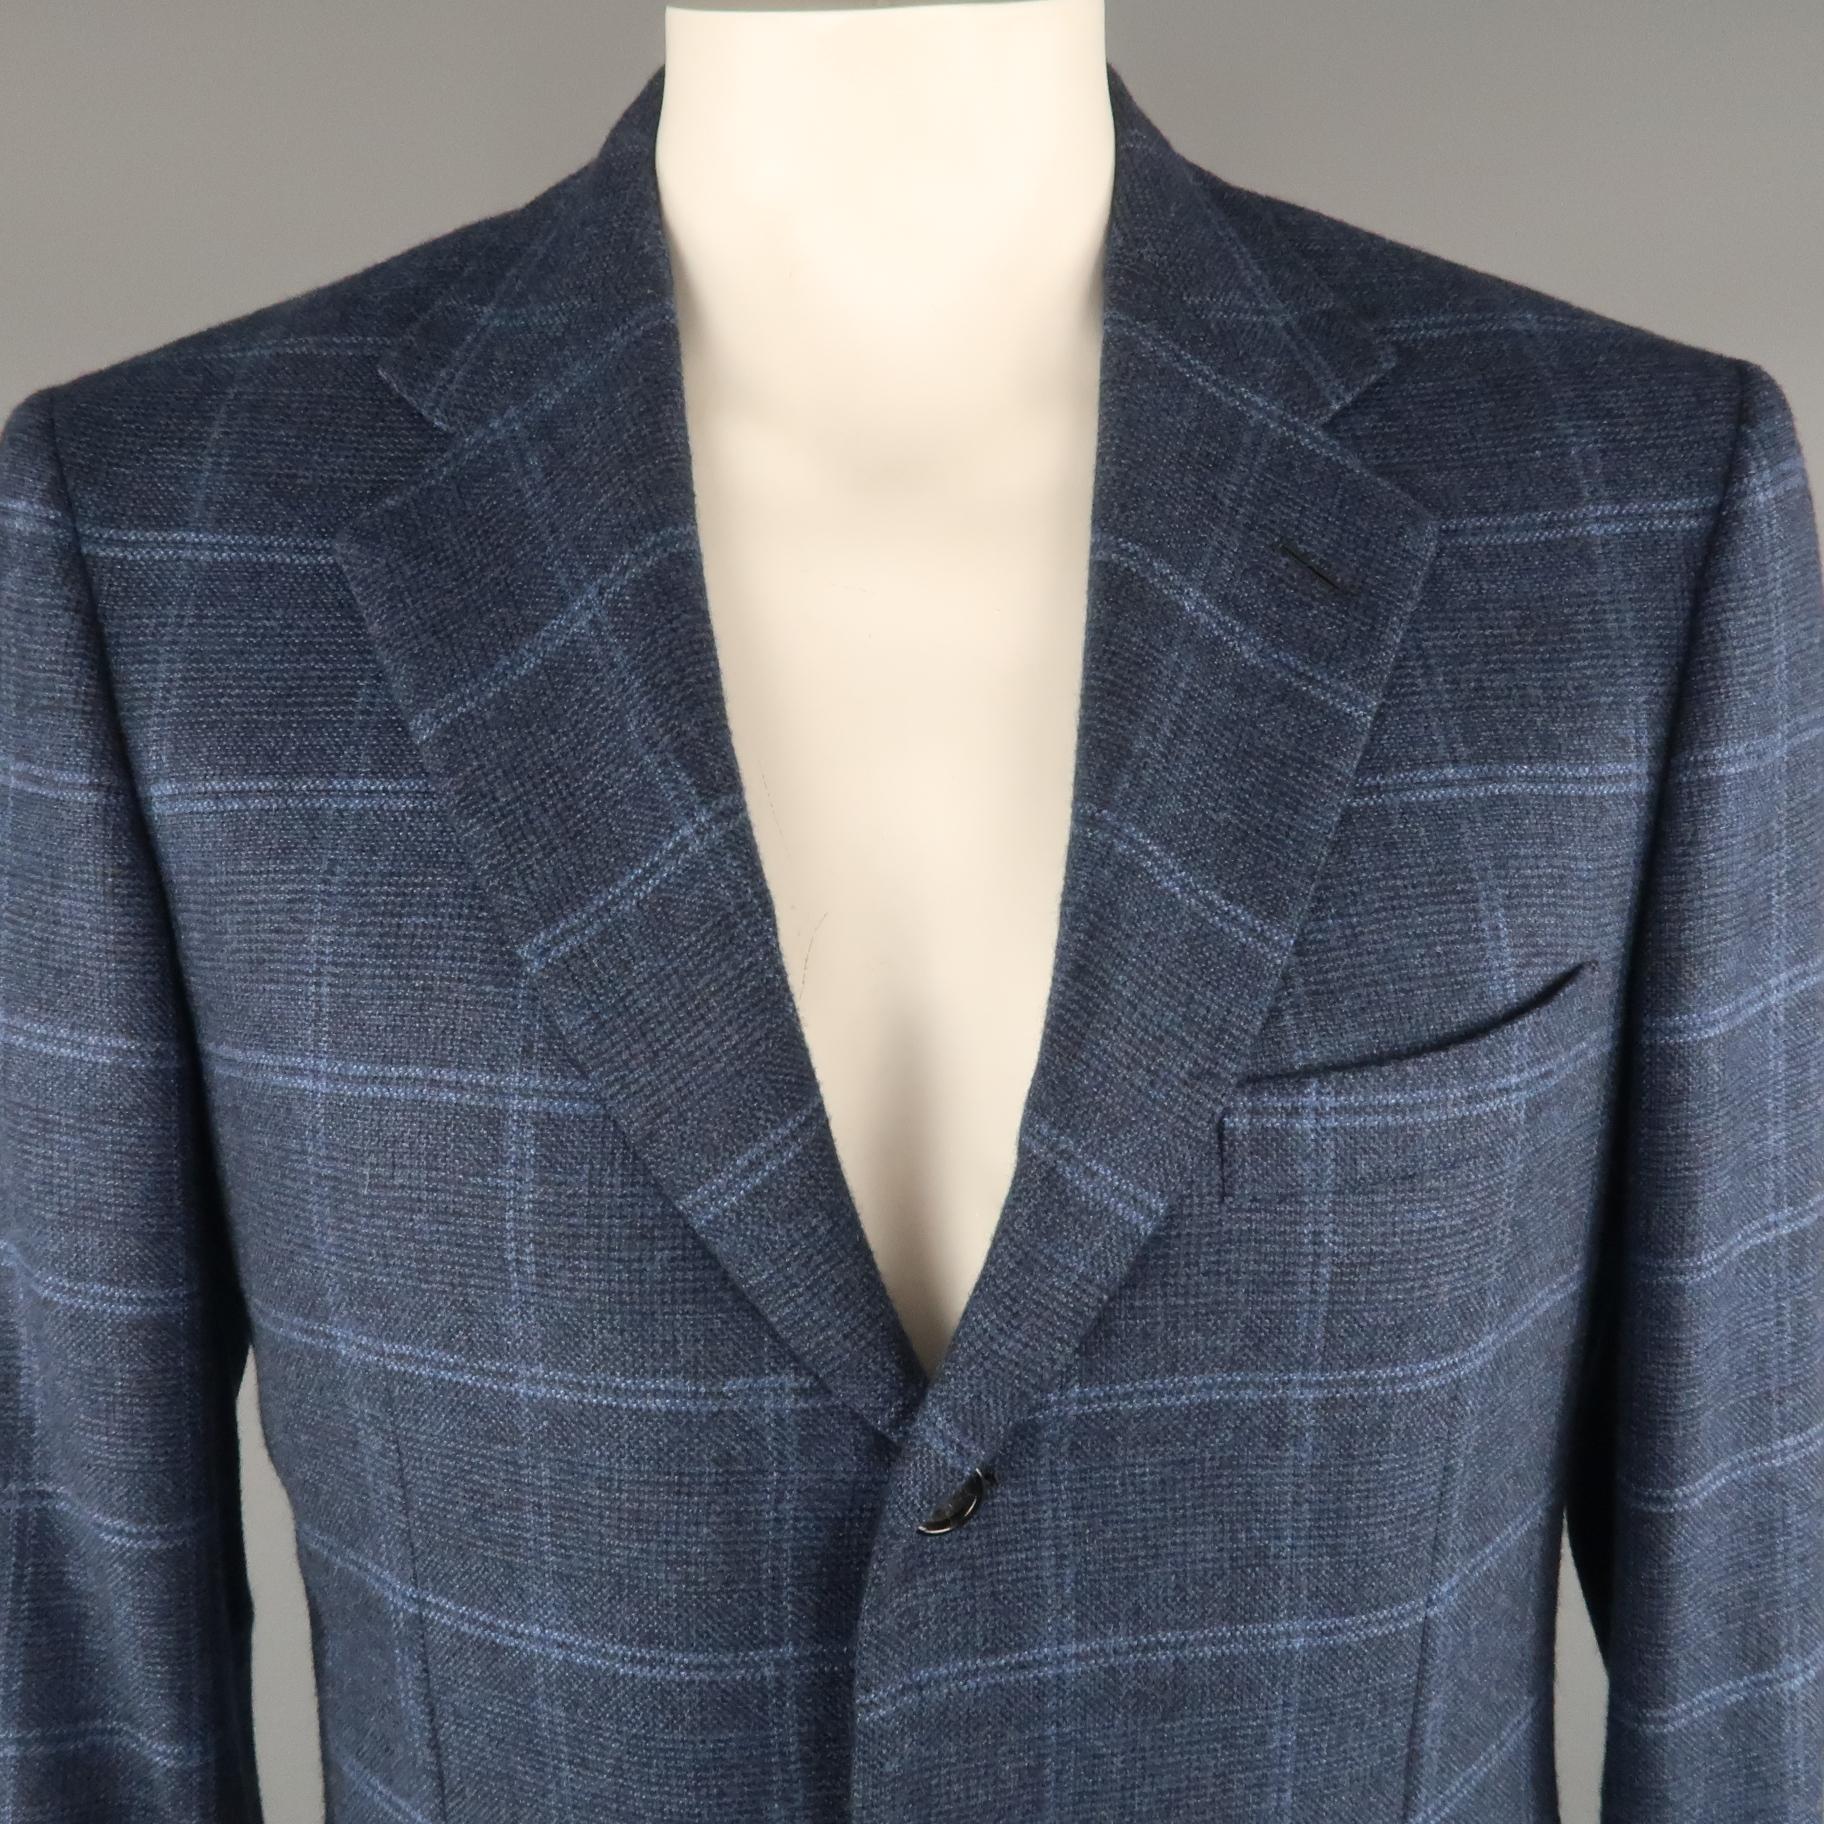 BRIONI for WILKES BASHFORD Sport Coat comes in a navy tone in a window pane cashmere material, with a notch lapel, slit and flap pockets, 3 buttons at closure, single breasted, and a double vent at back. Made in Italy.
 
Excellent  Pre-Owned